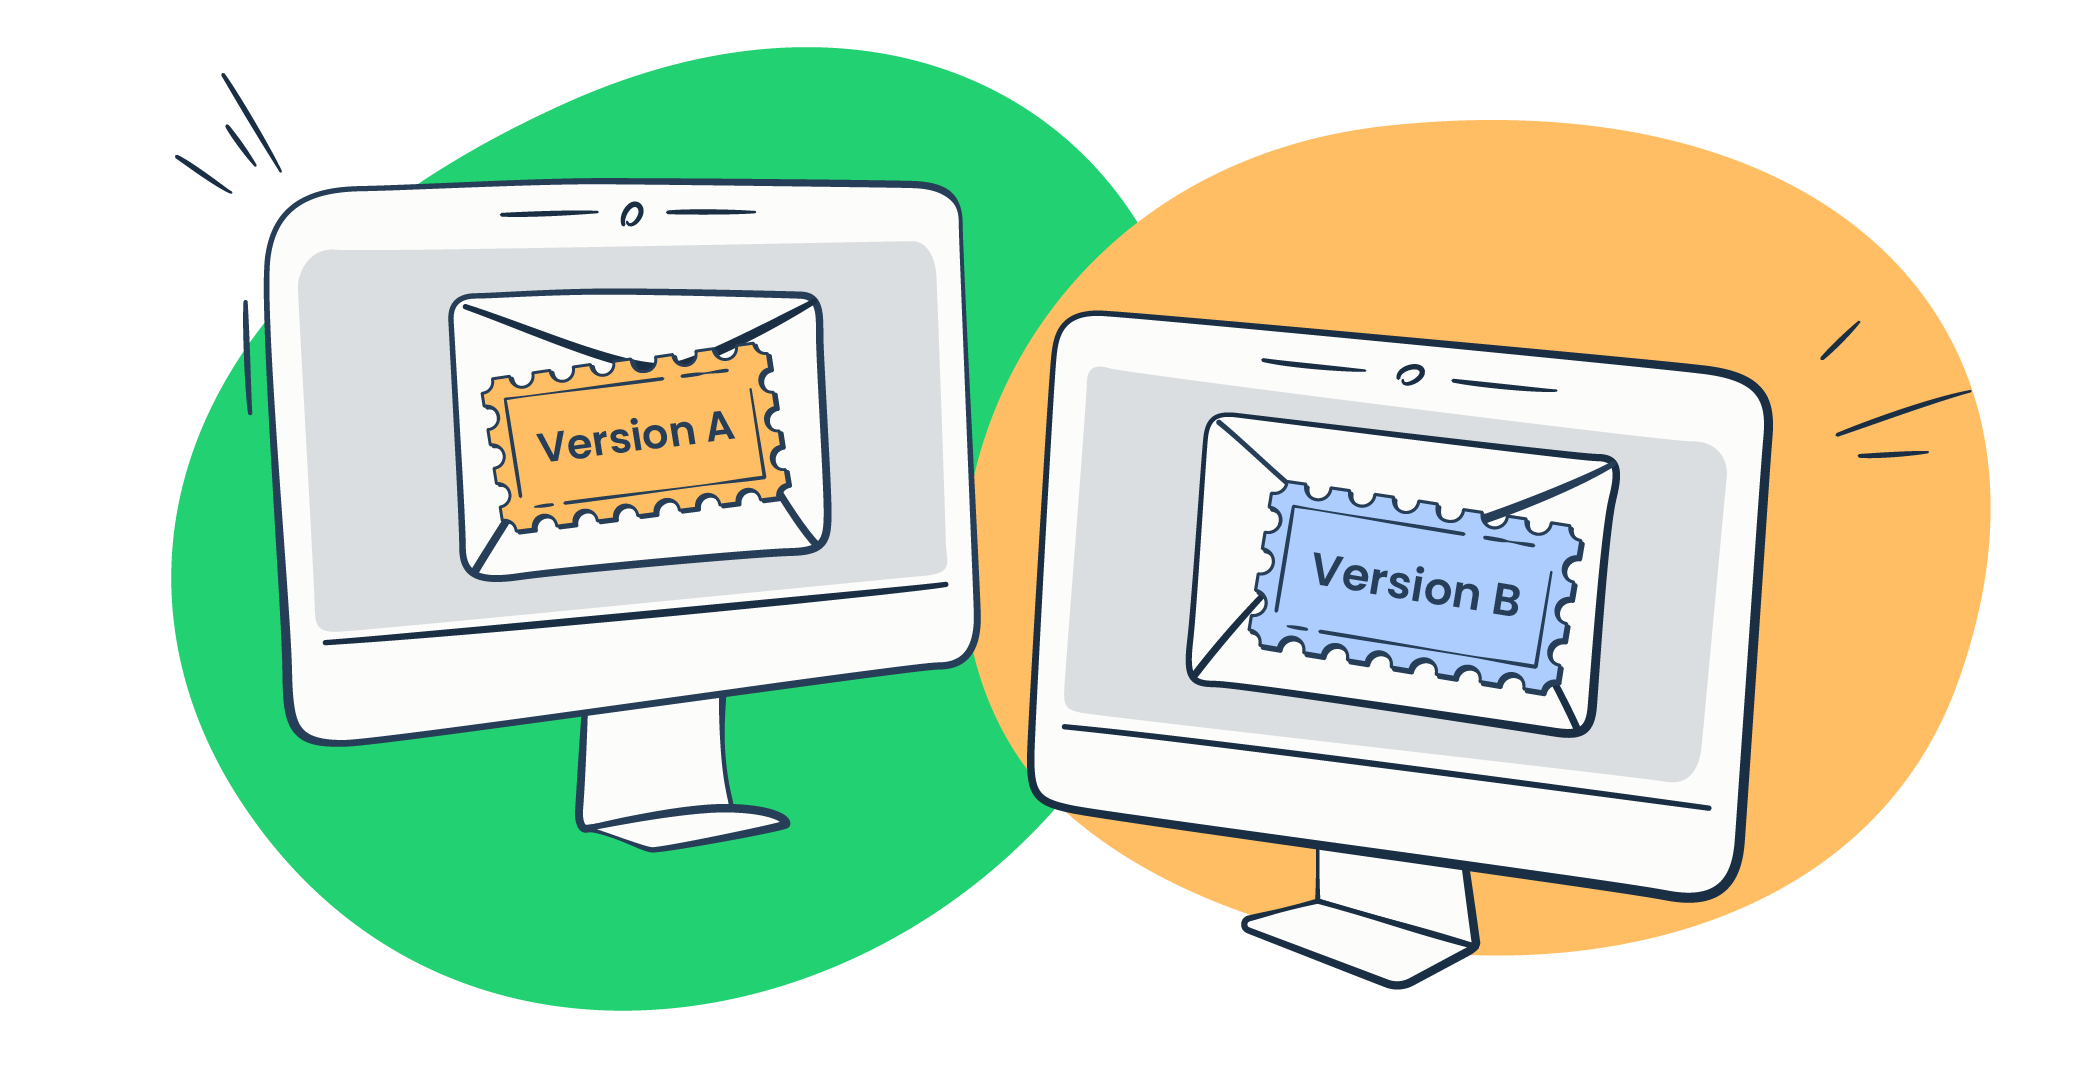 This image is a symbolic graphic representation of A/B testing for the article that covers the topic in detail.